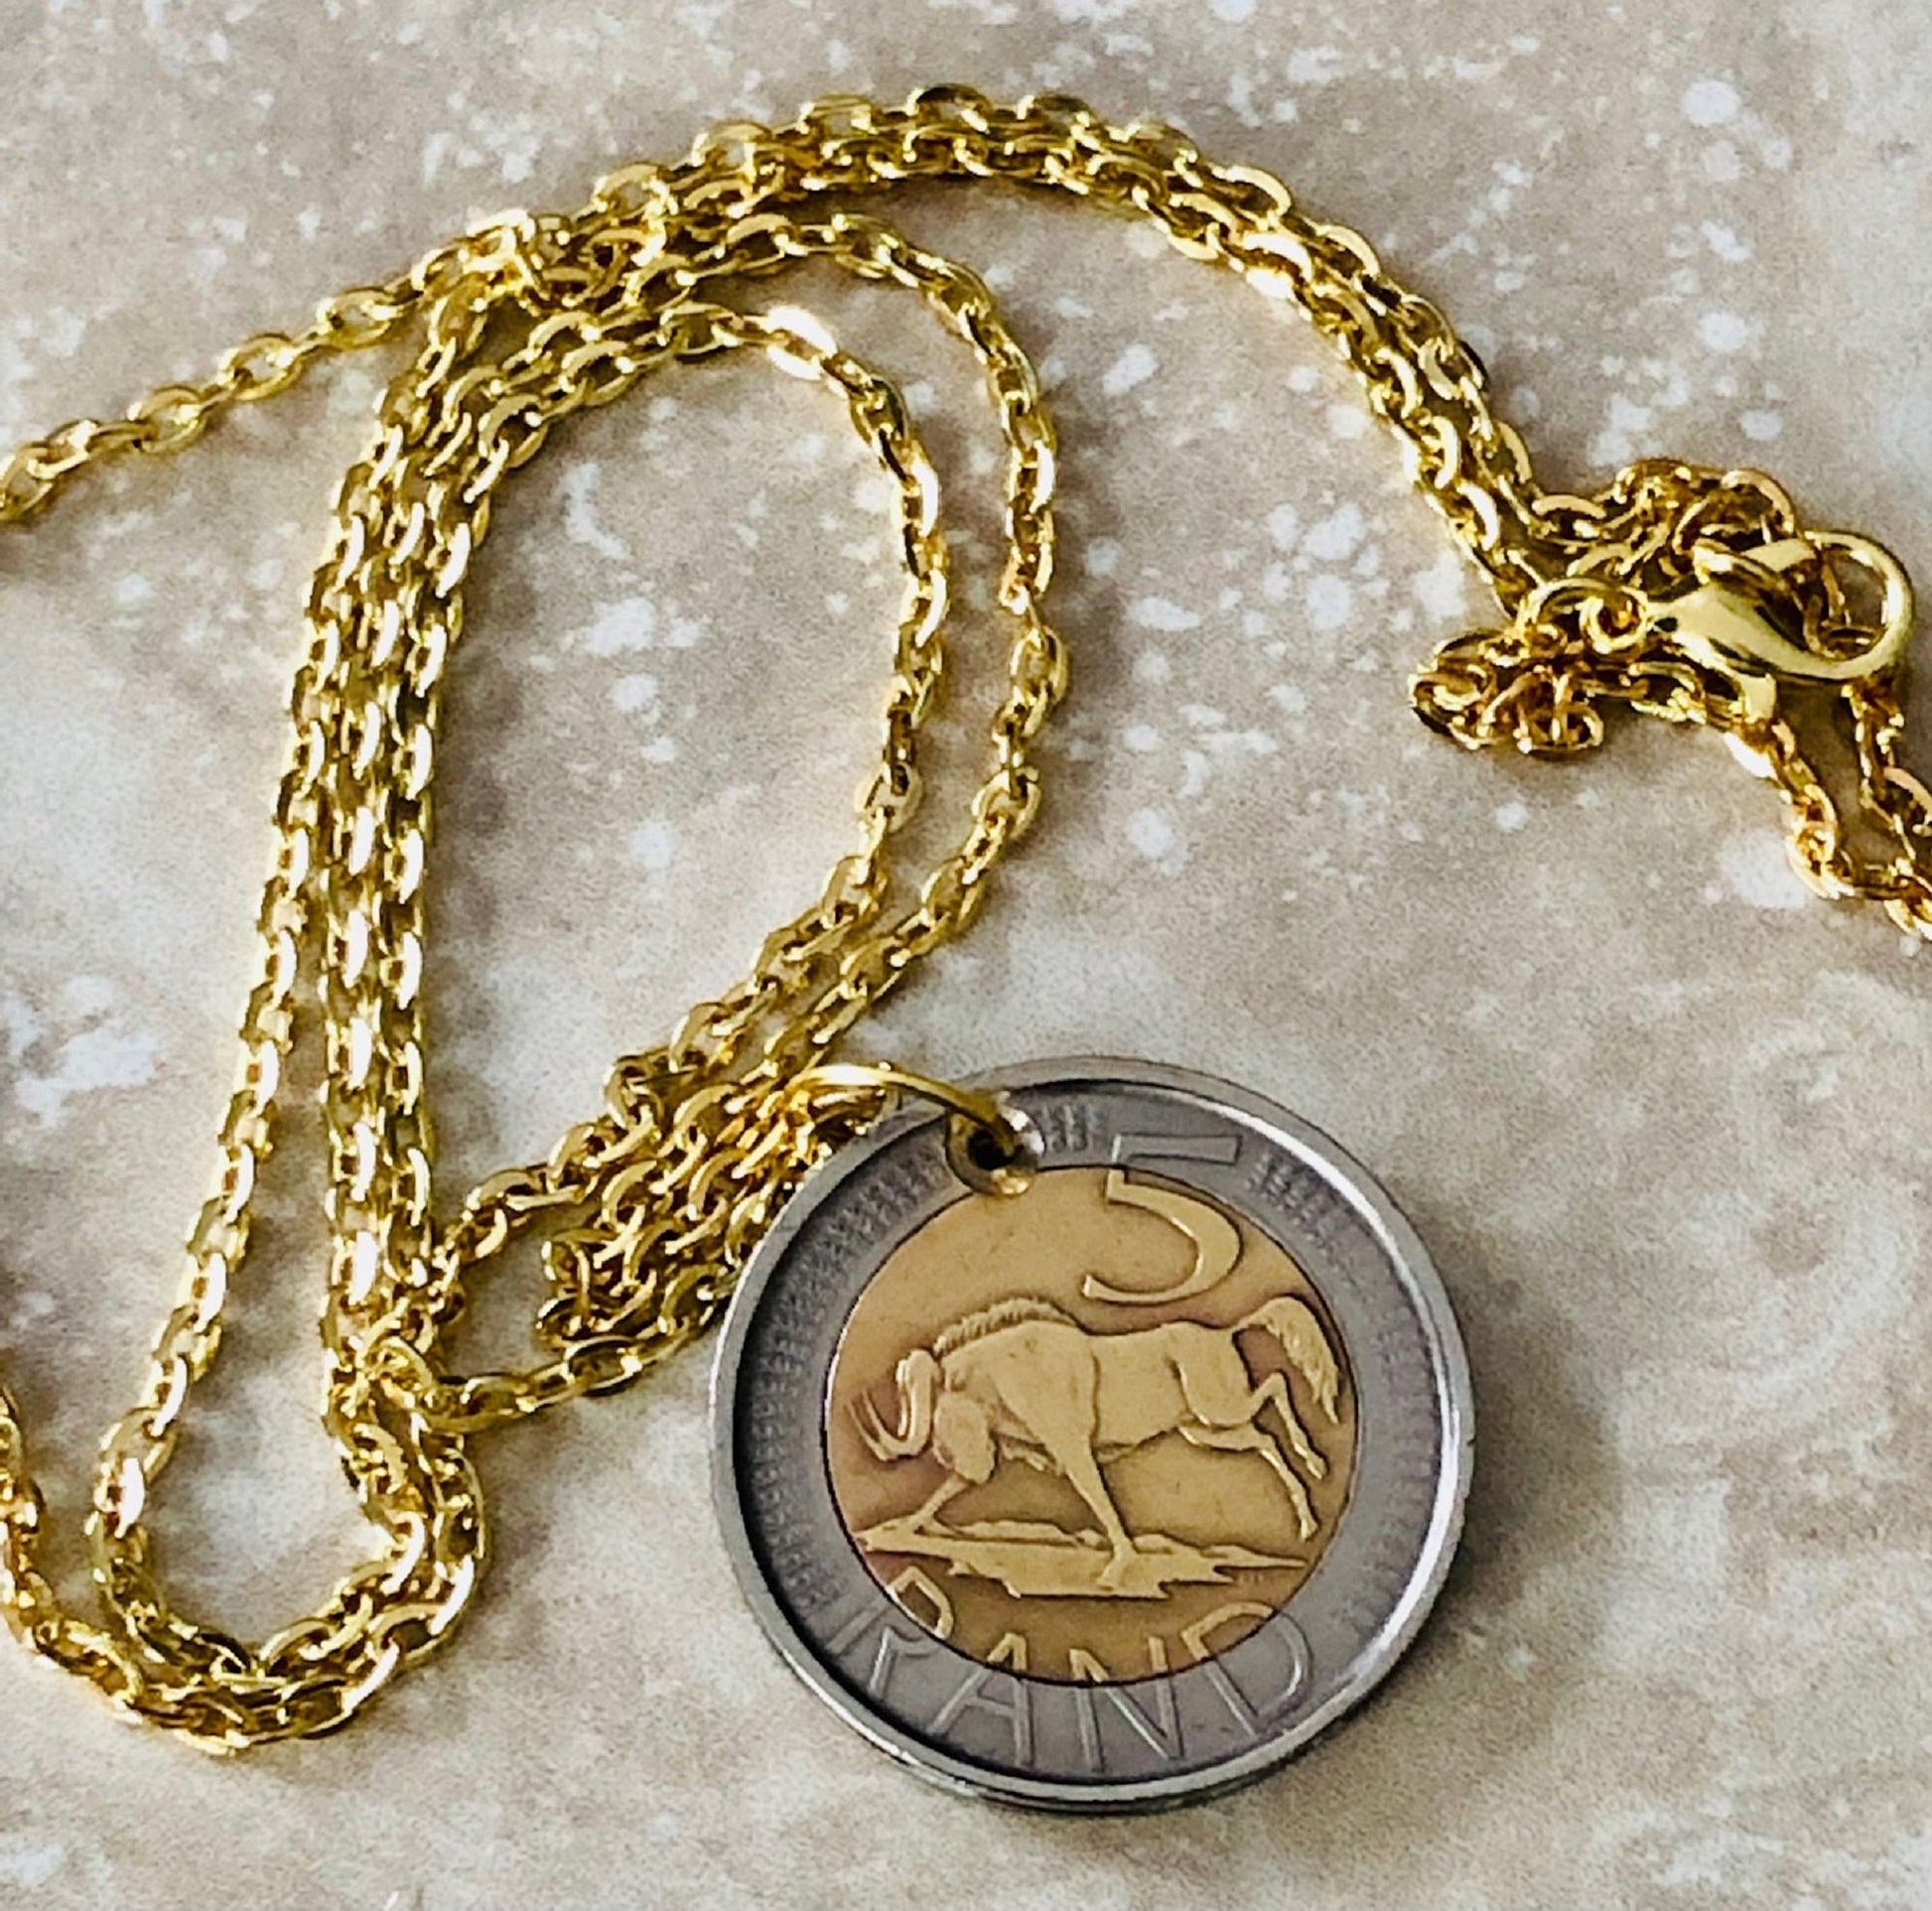 South Africa Necklace 5 RAND Afrika Dzonga Ningizimu Wildebeest Bull Vintage Pendant Jewelry Gift Friend Charm Him Her World Coin Collector